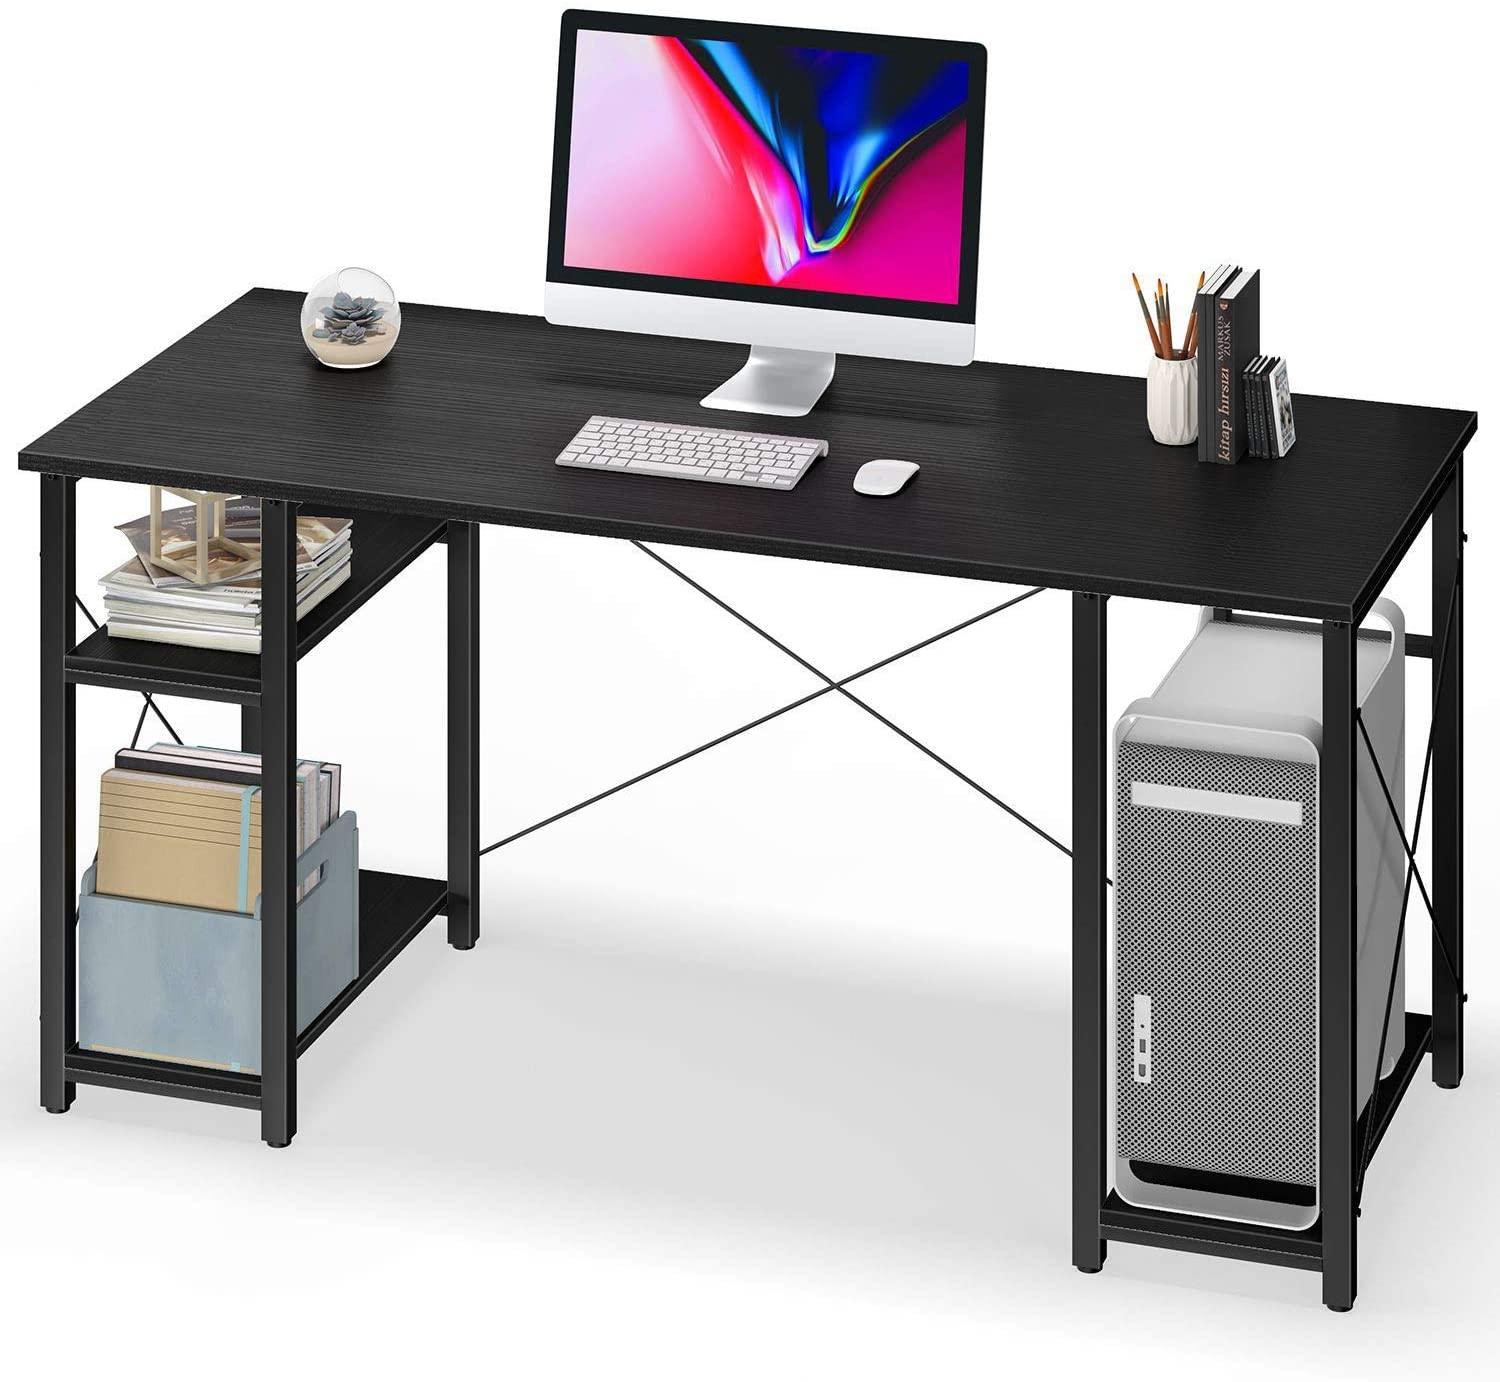 Computer Desk with Storage Shelves 55 inch Home Office Desk for $49.99 Shipped